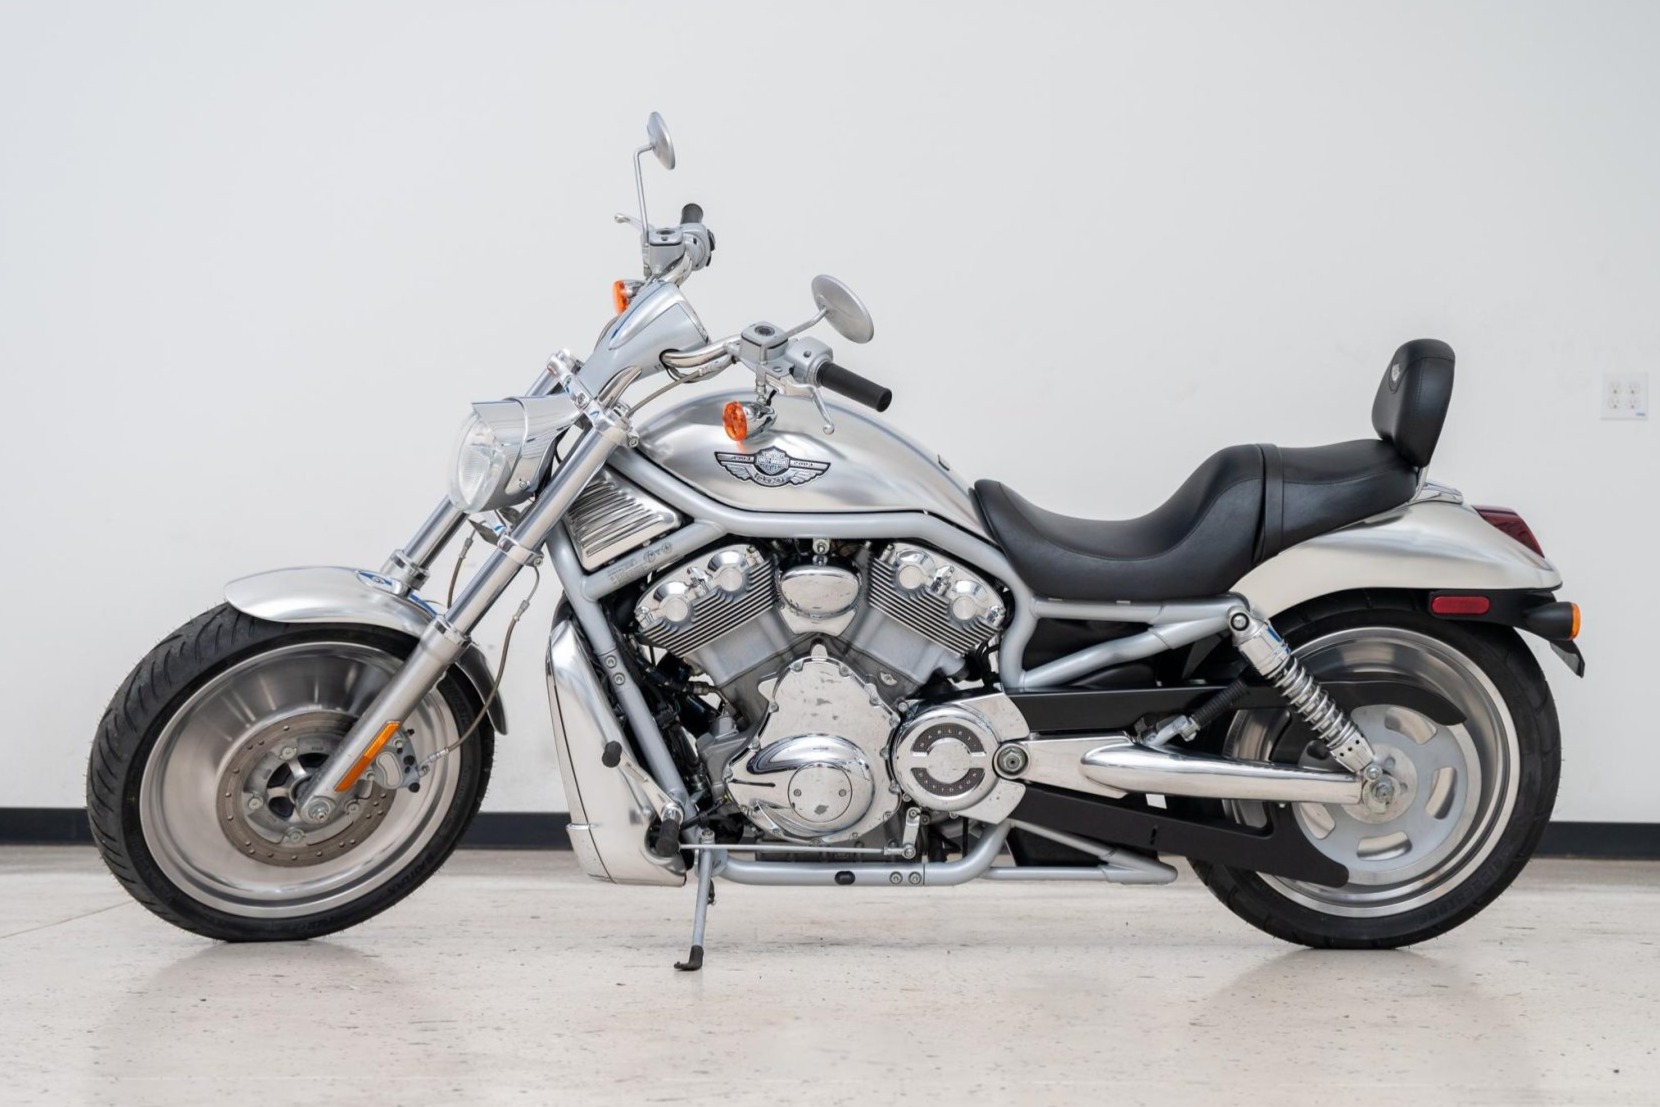 Used 1,300-Mile 2003 Harley-Davidson V-Rod 100th Anniversary Review